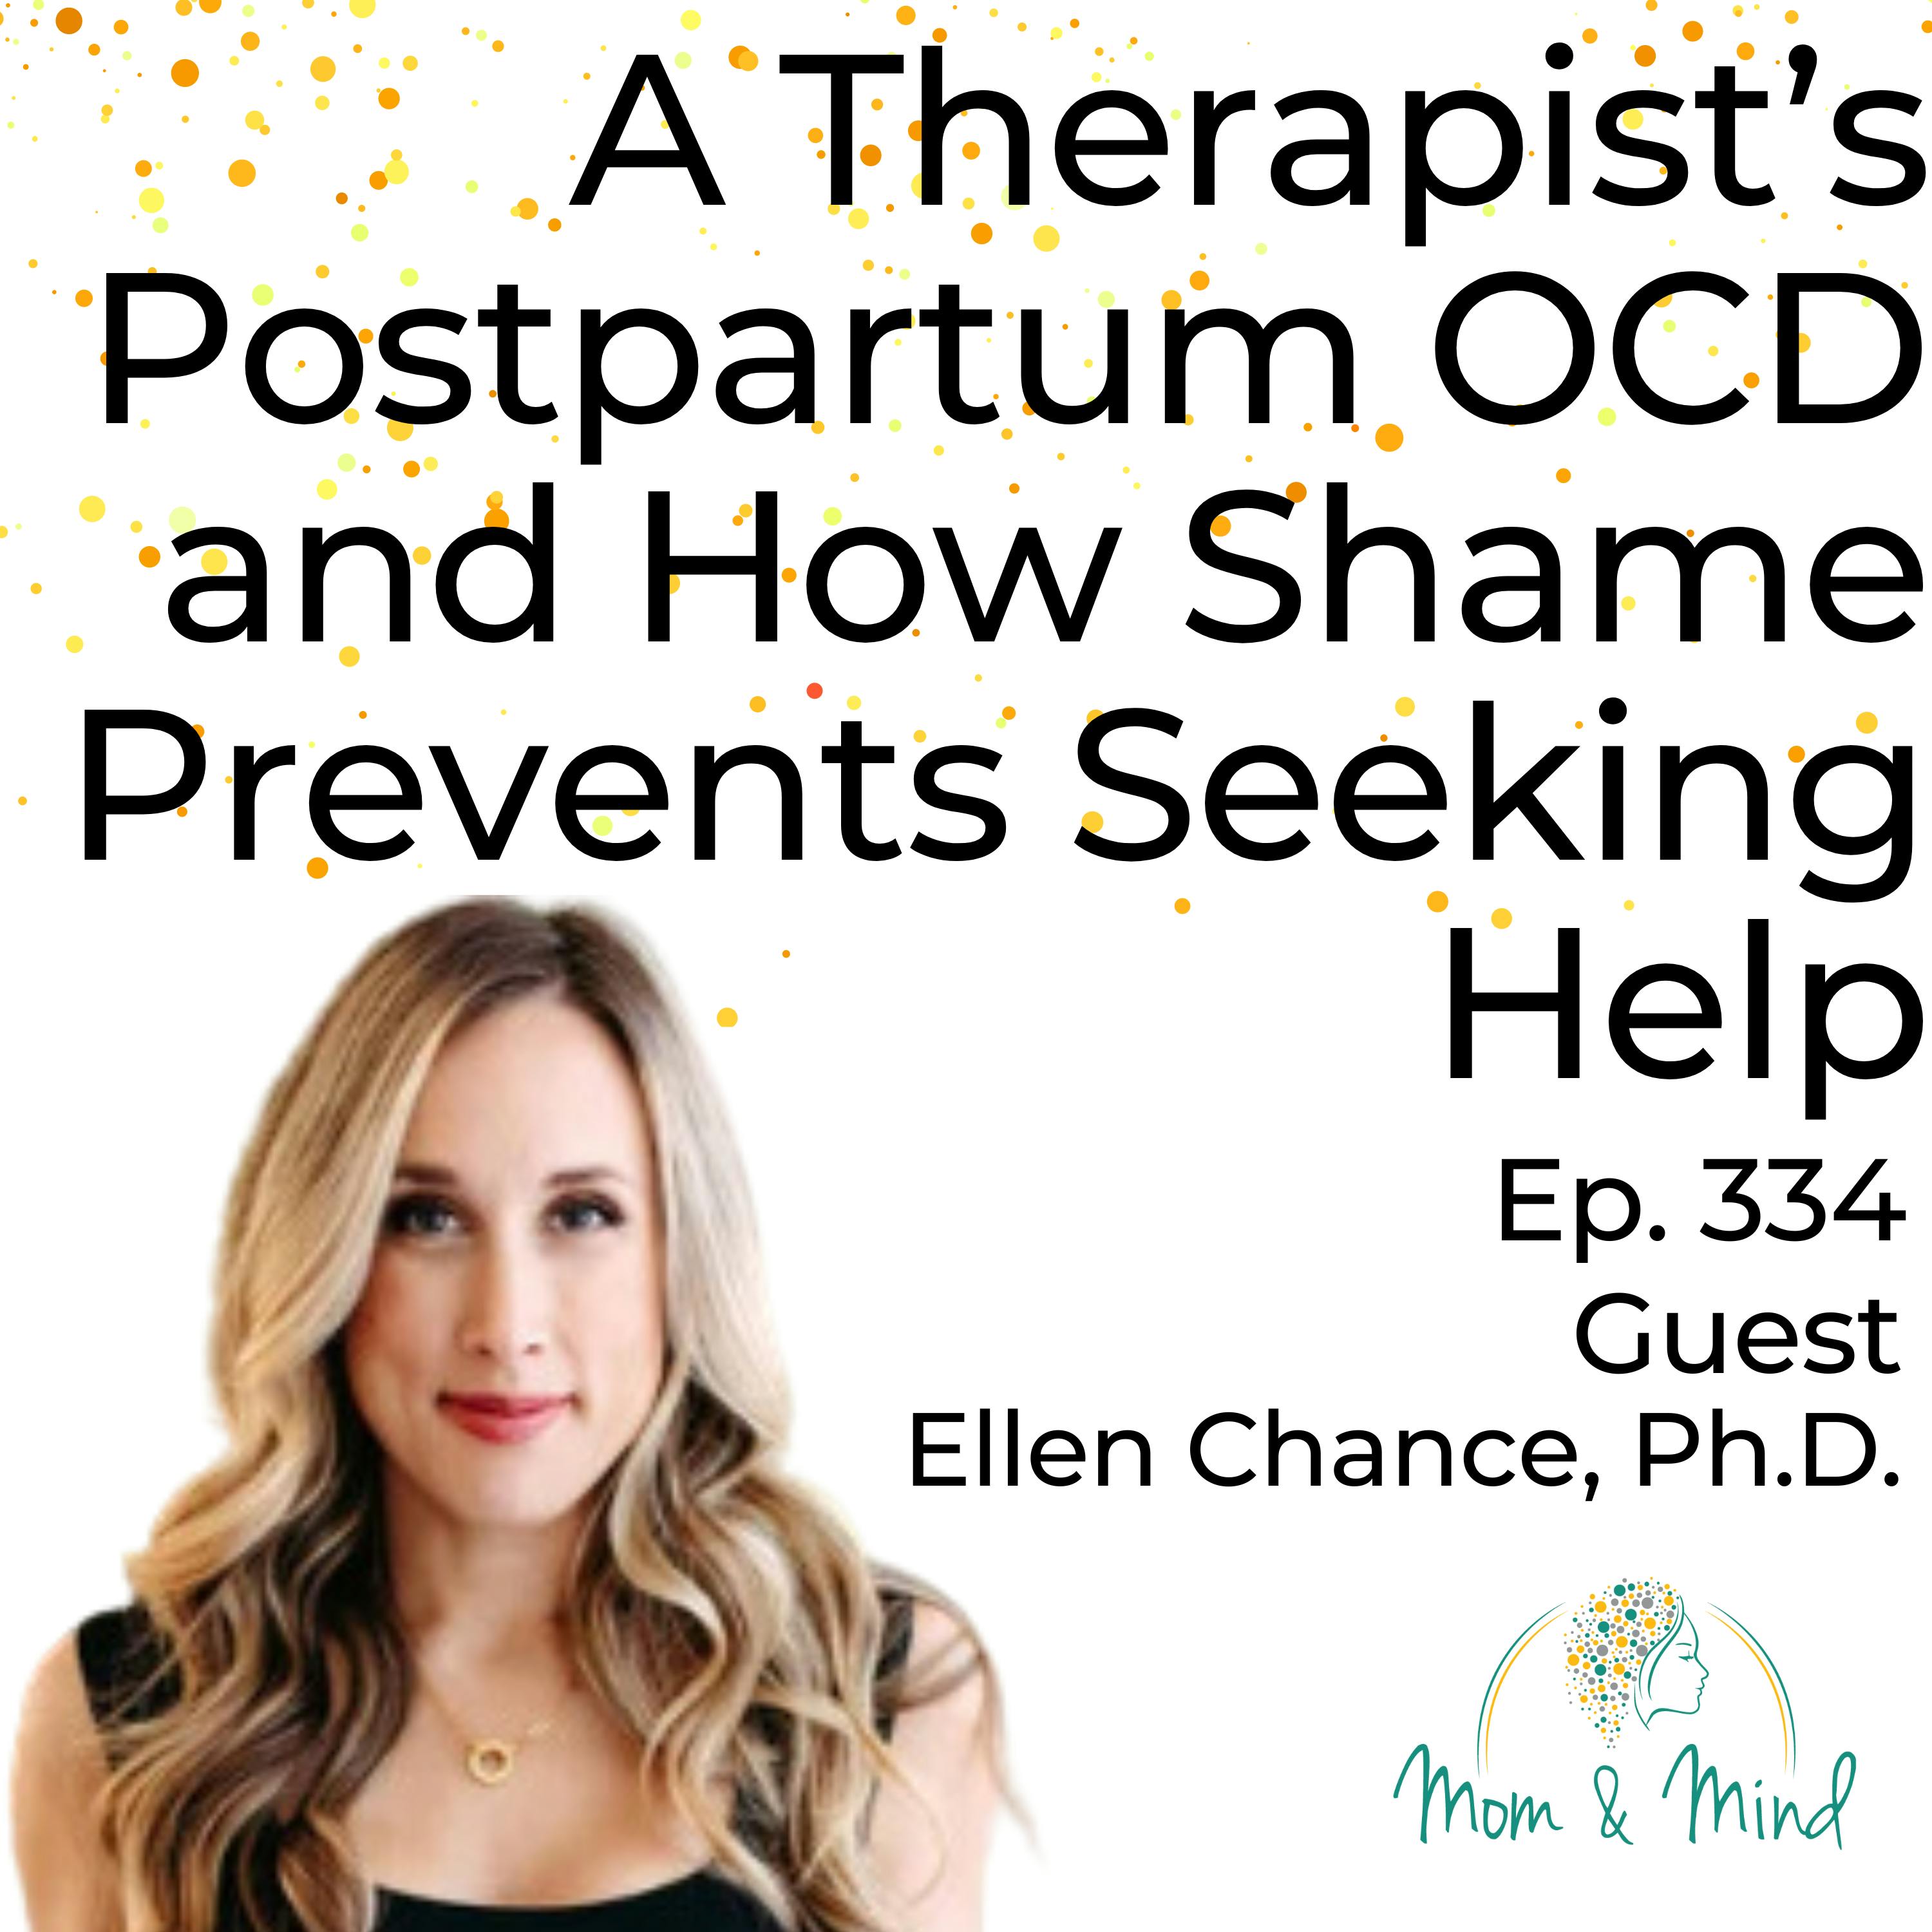 334: A Therapist’s Postpartum OCD and How Shame Prevents Seeking Help  with Ellen Chance, Ph.D.